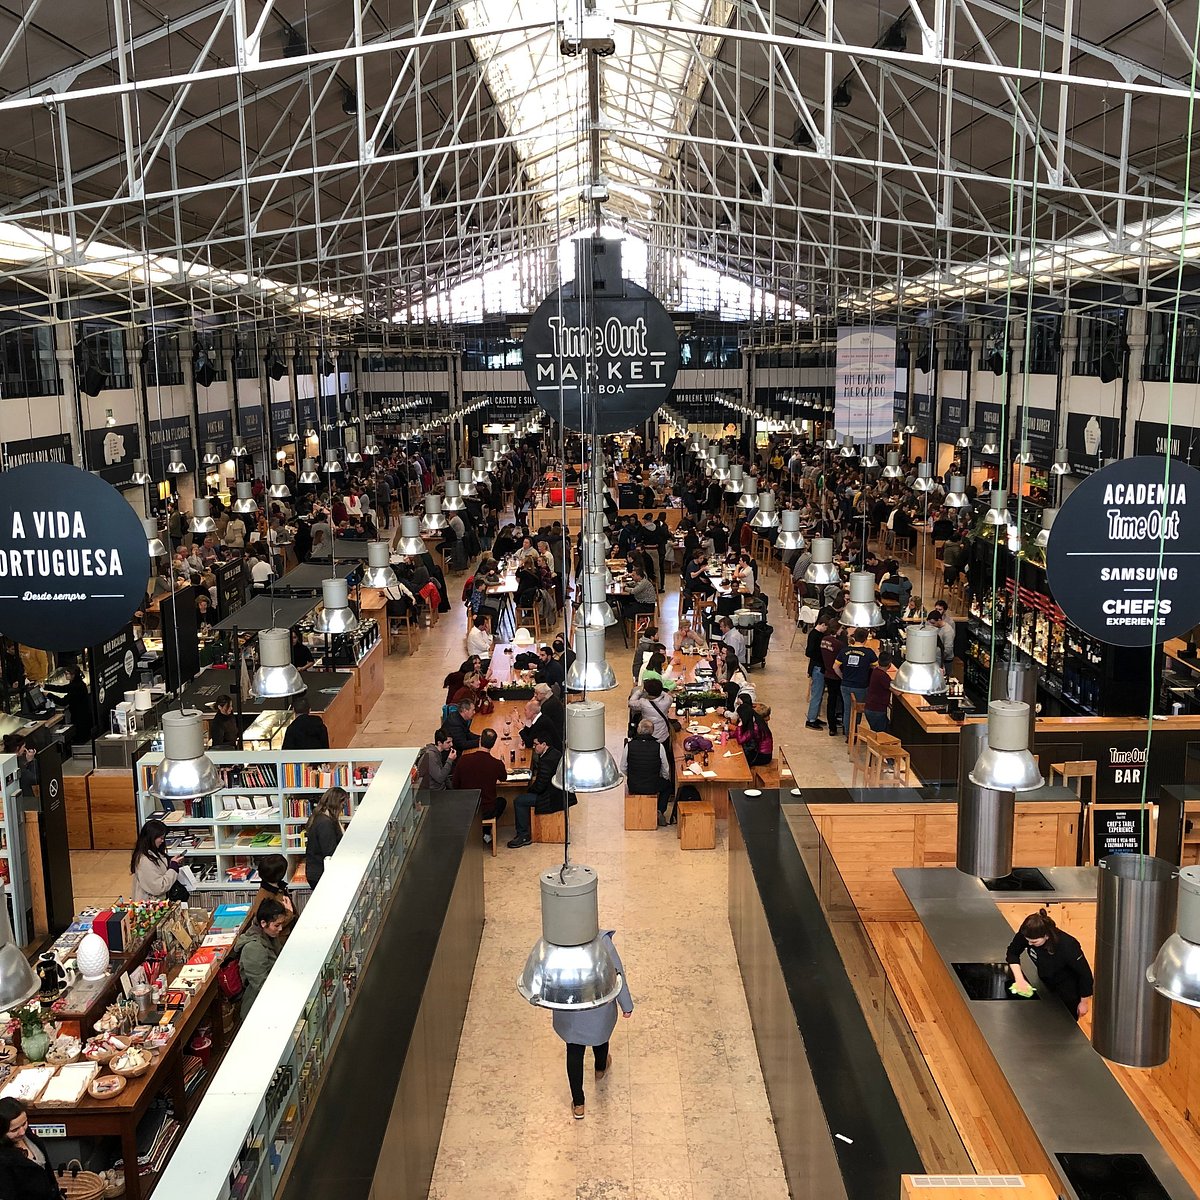 Review of Lisbon's Time Out Market: Great Food, Crowded Environment